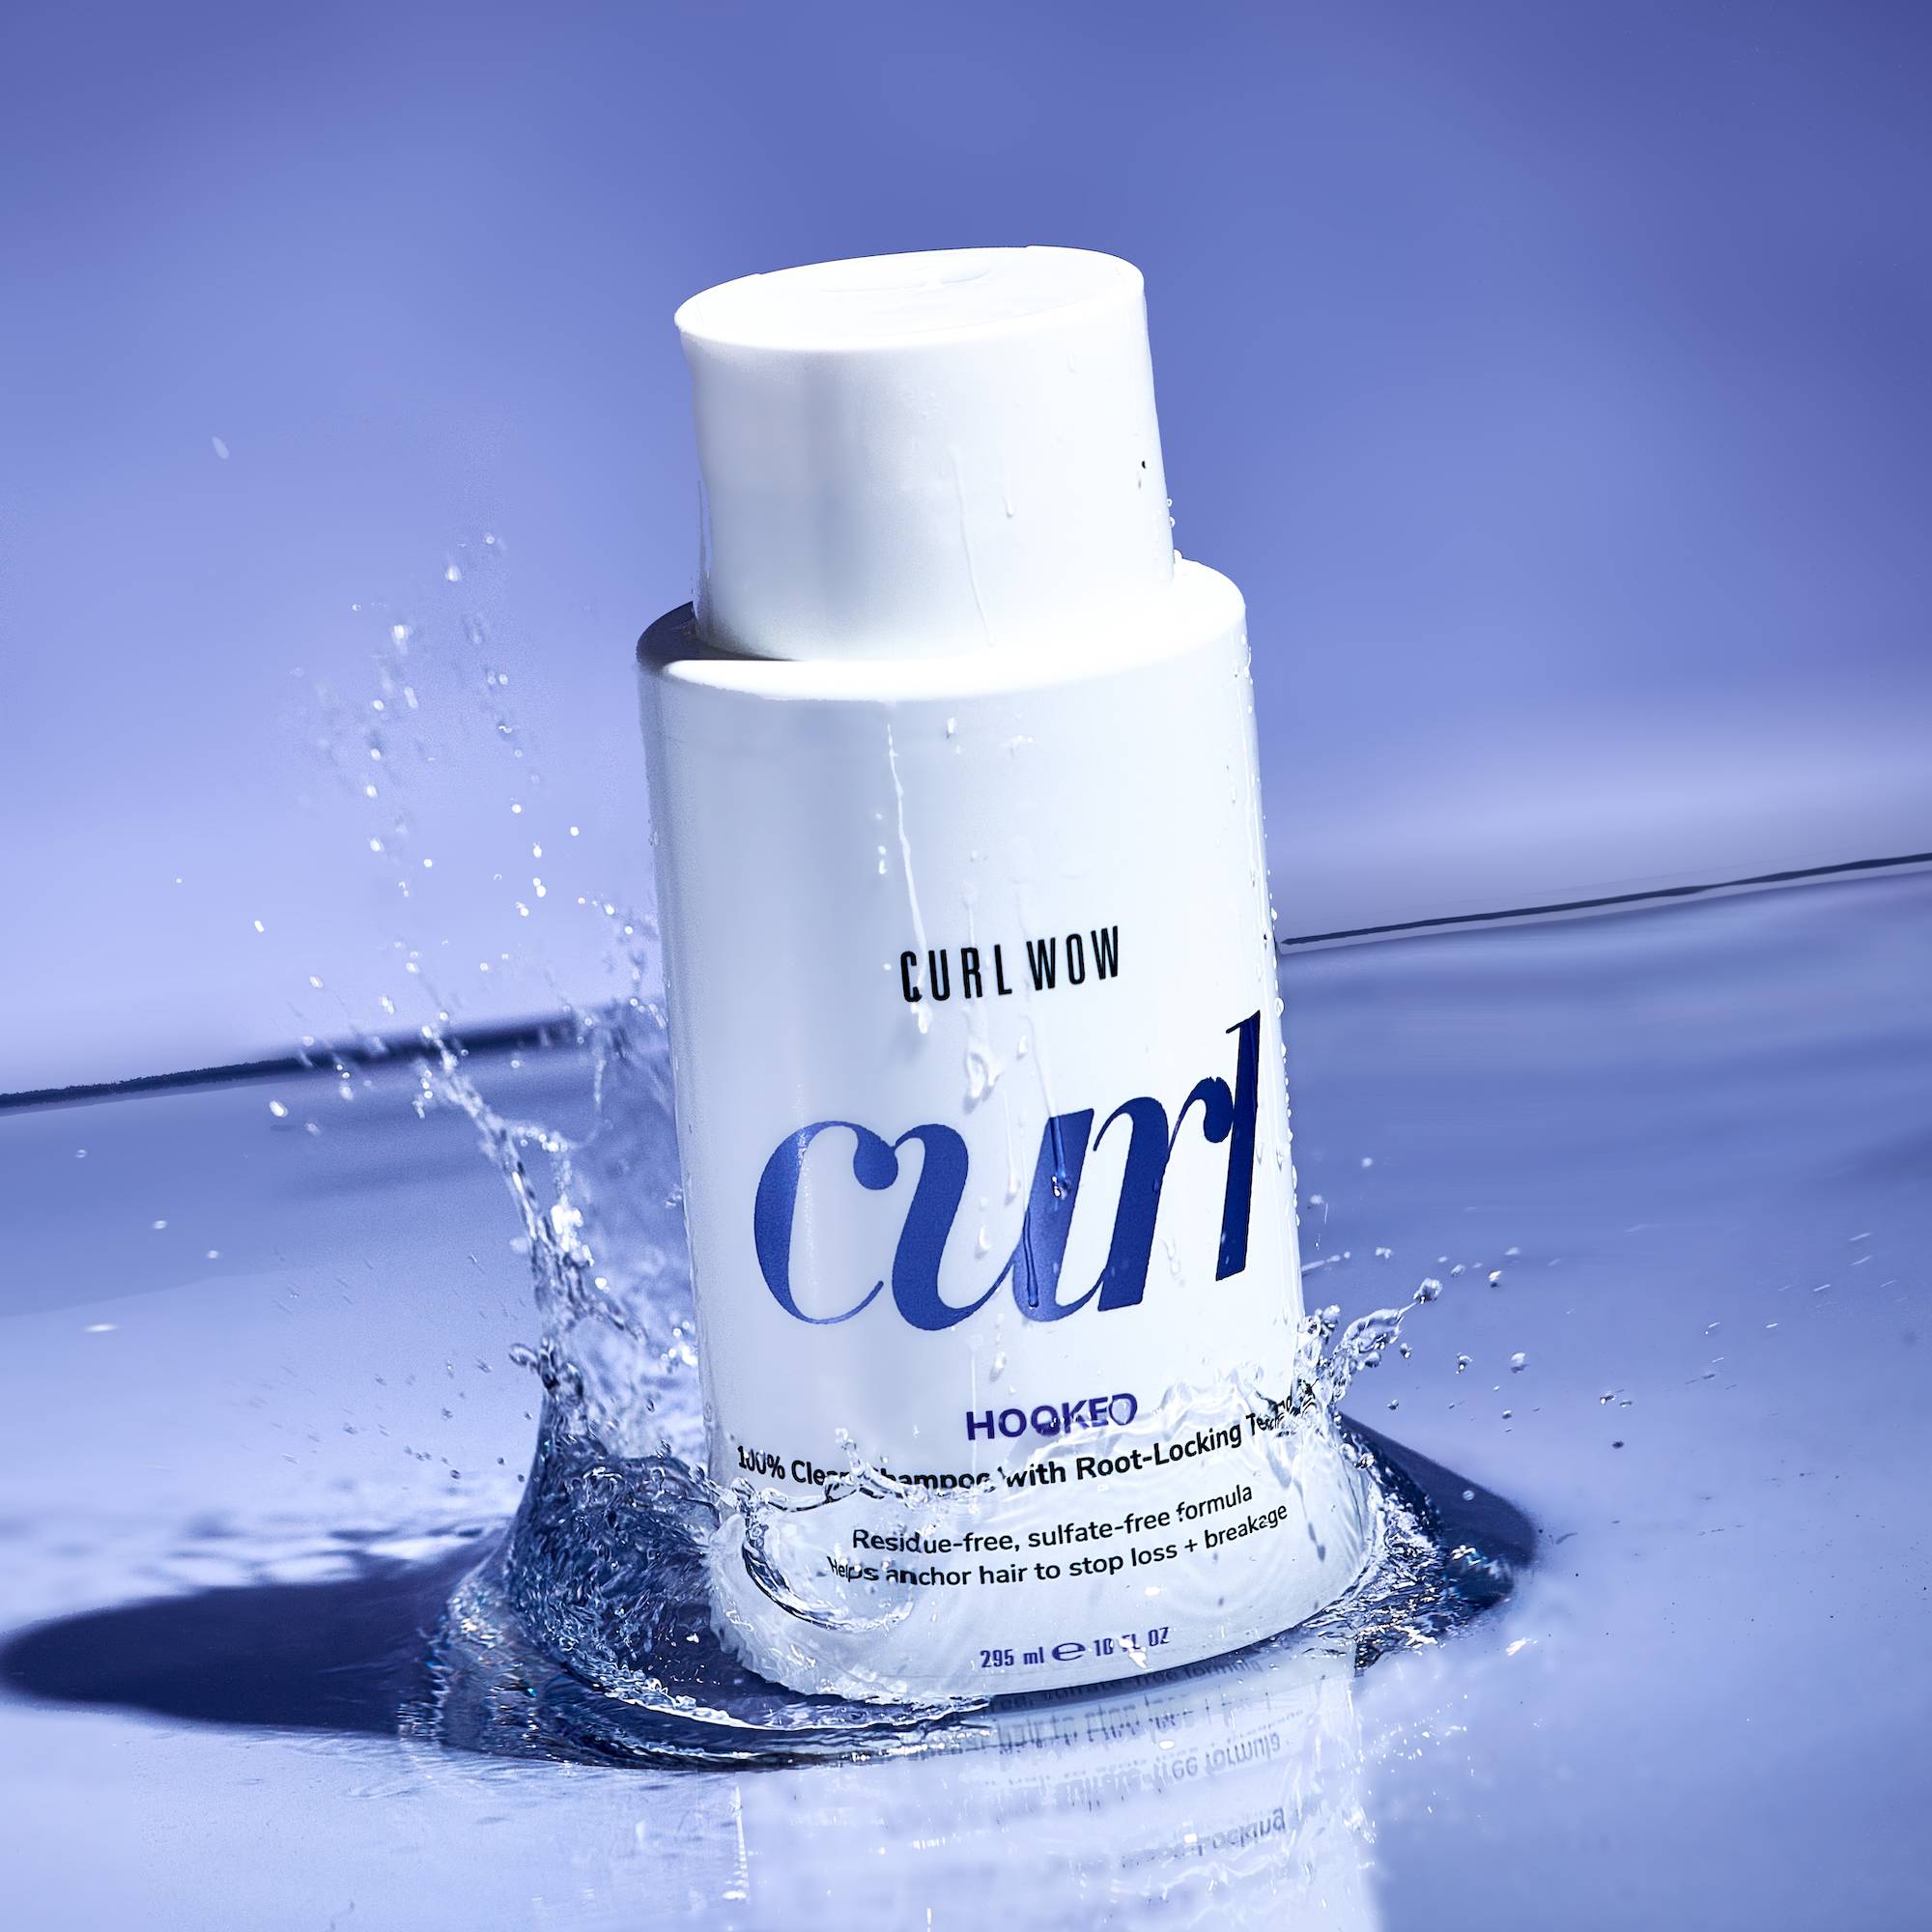 produit: Shampoing « Hooked » - Curl Wow